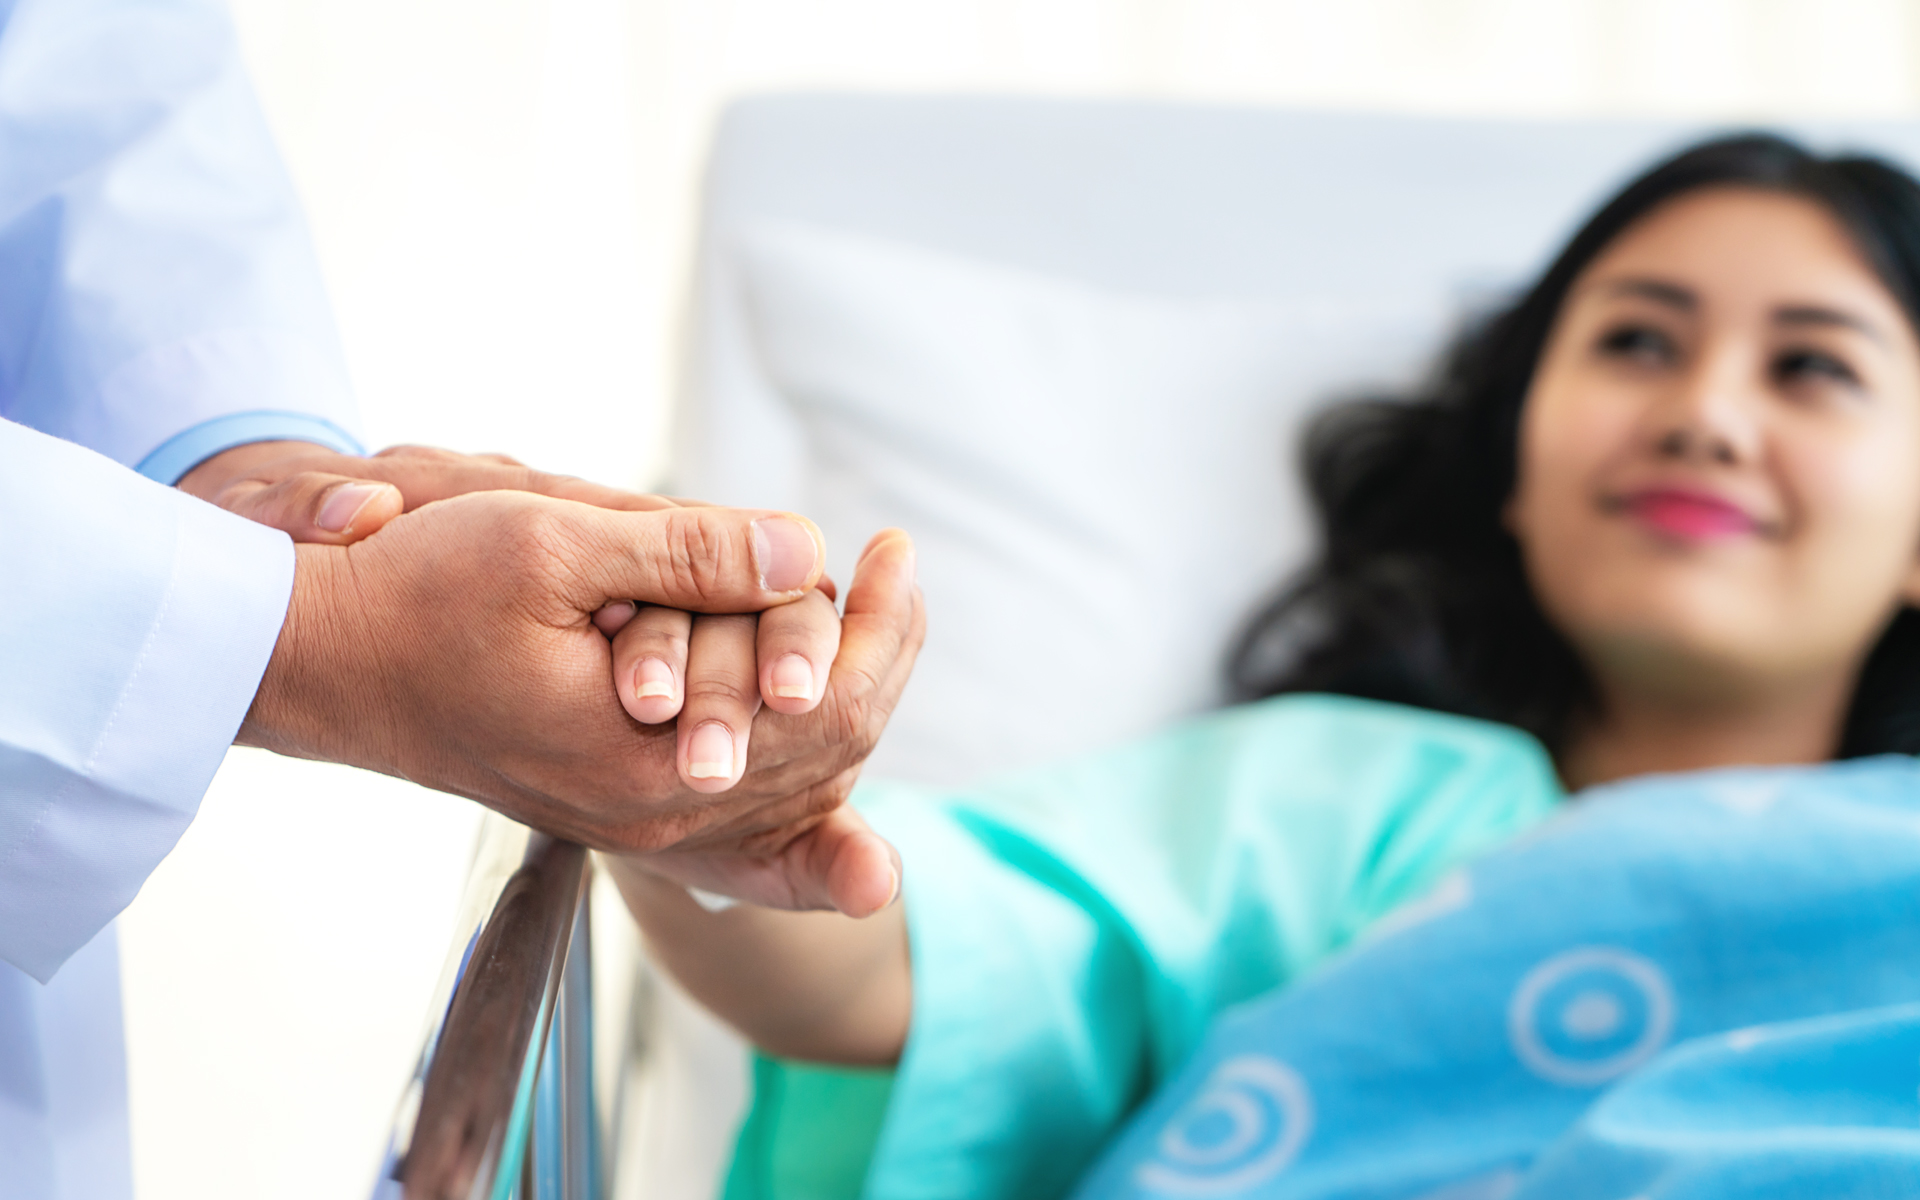 Image for Best Tips on How to Avoid or Manage Medical Debt. Image of a doctor holding a patient's hand with both of their hands while the patient lies in bed.